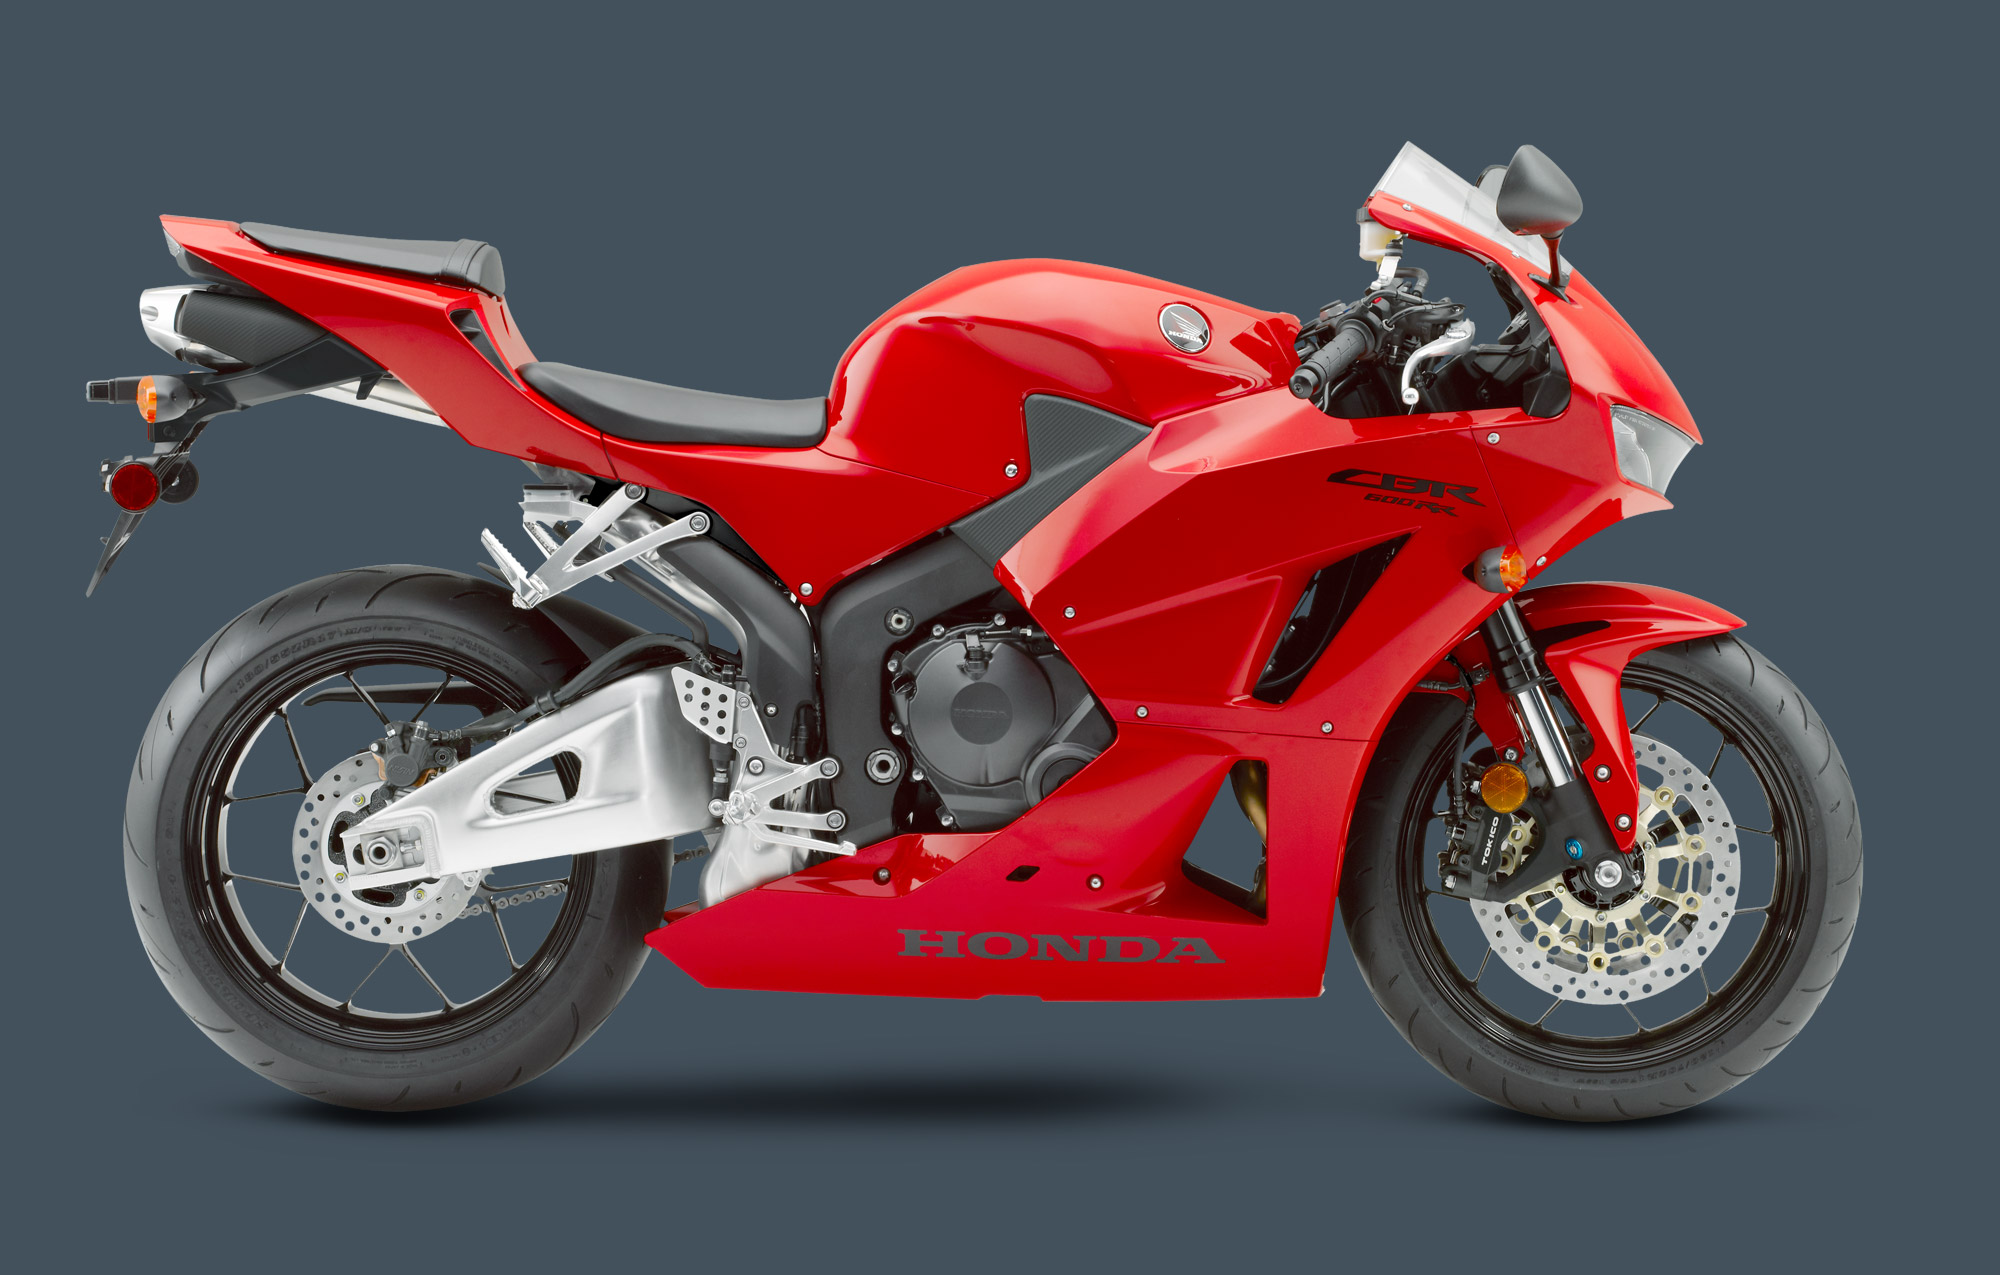 Honda cbr600rr (2009-2013) review and used buying guide | mcn